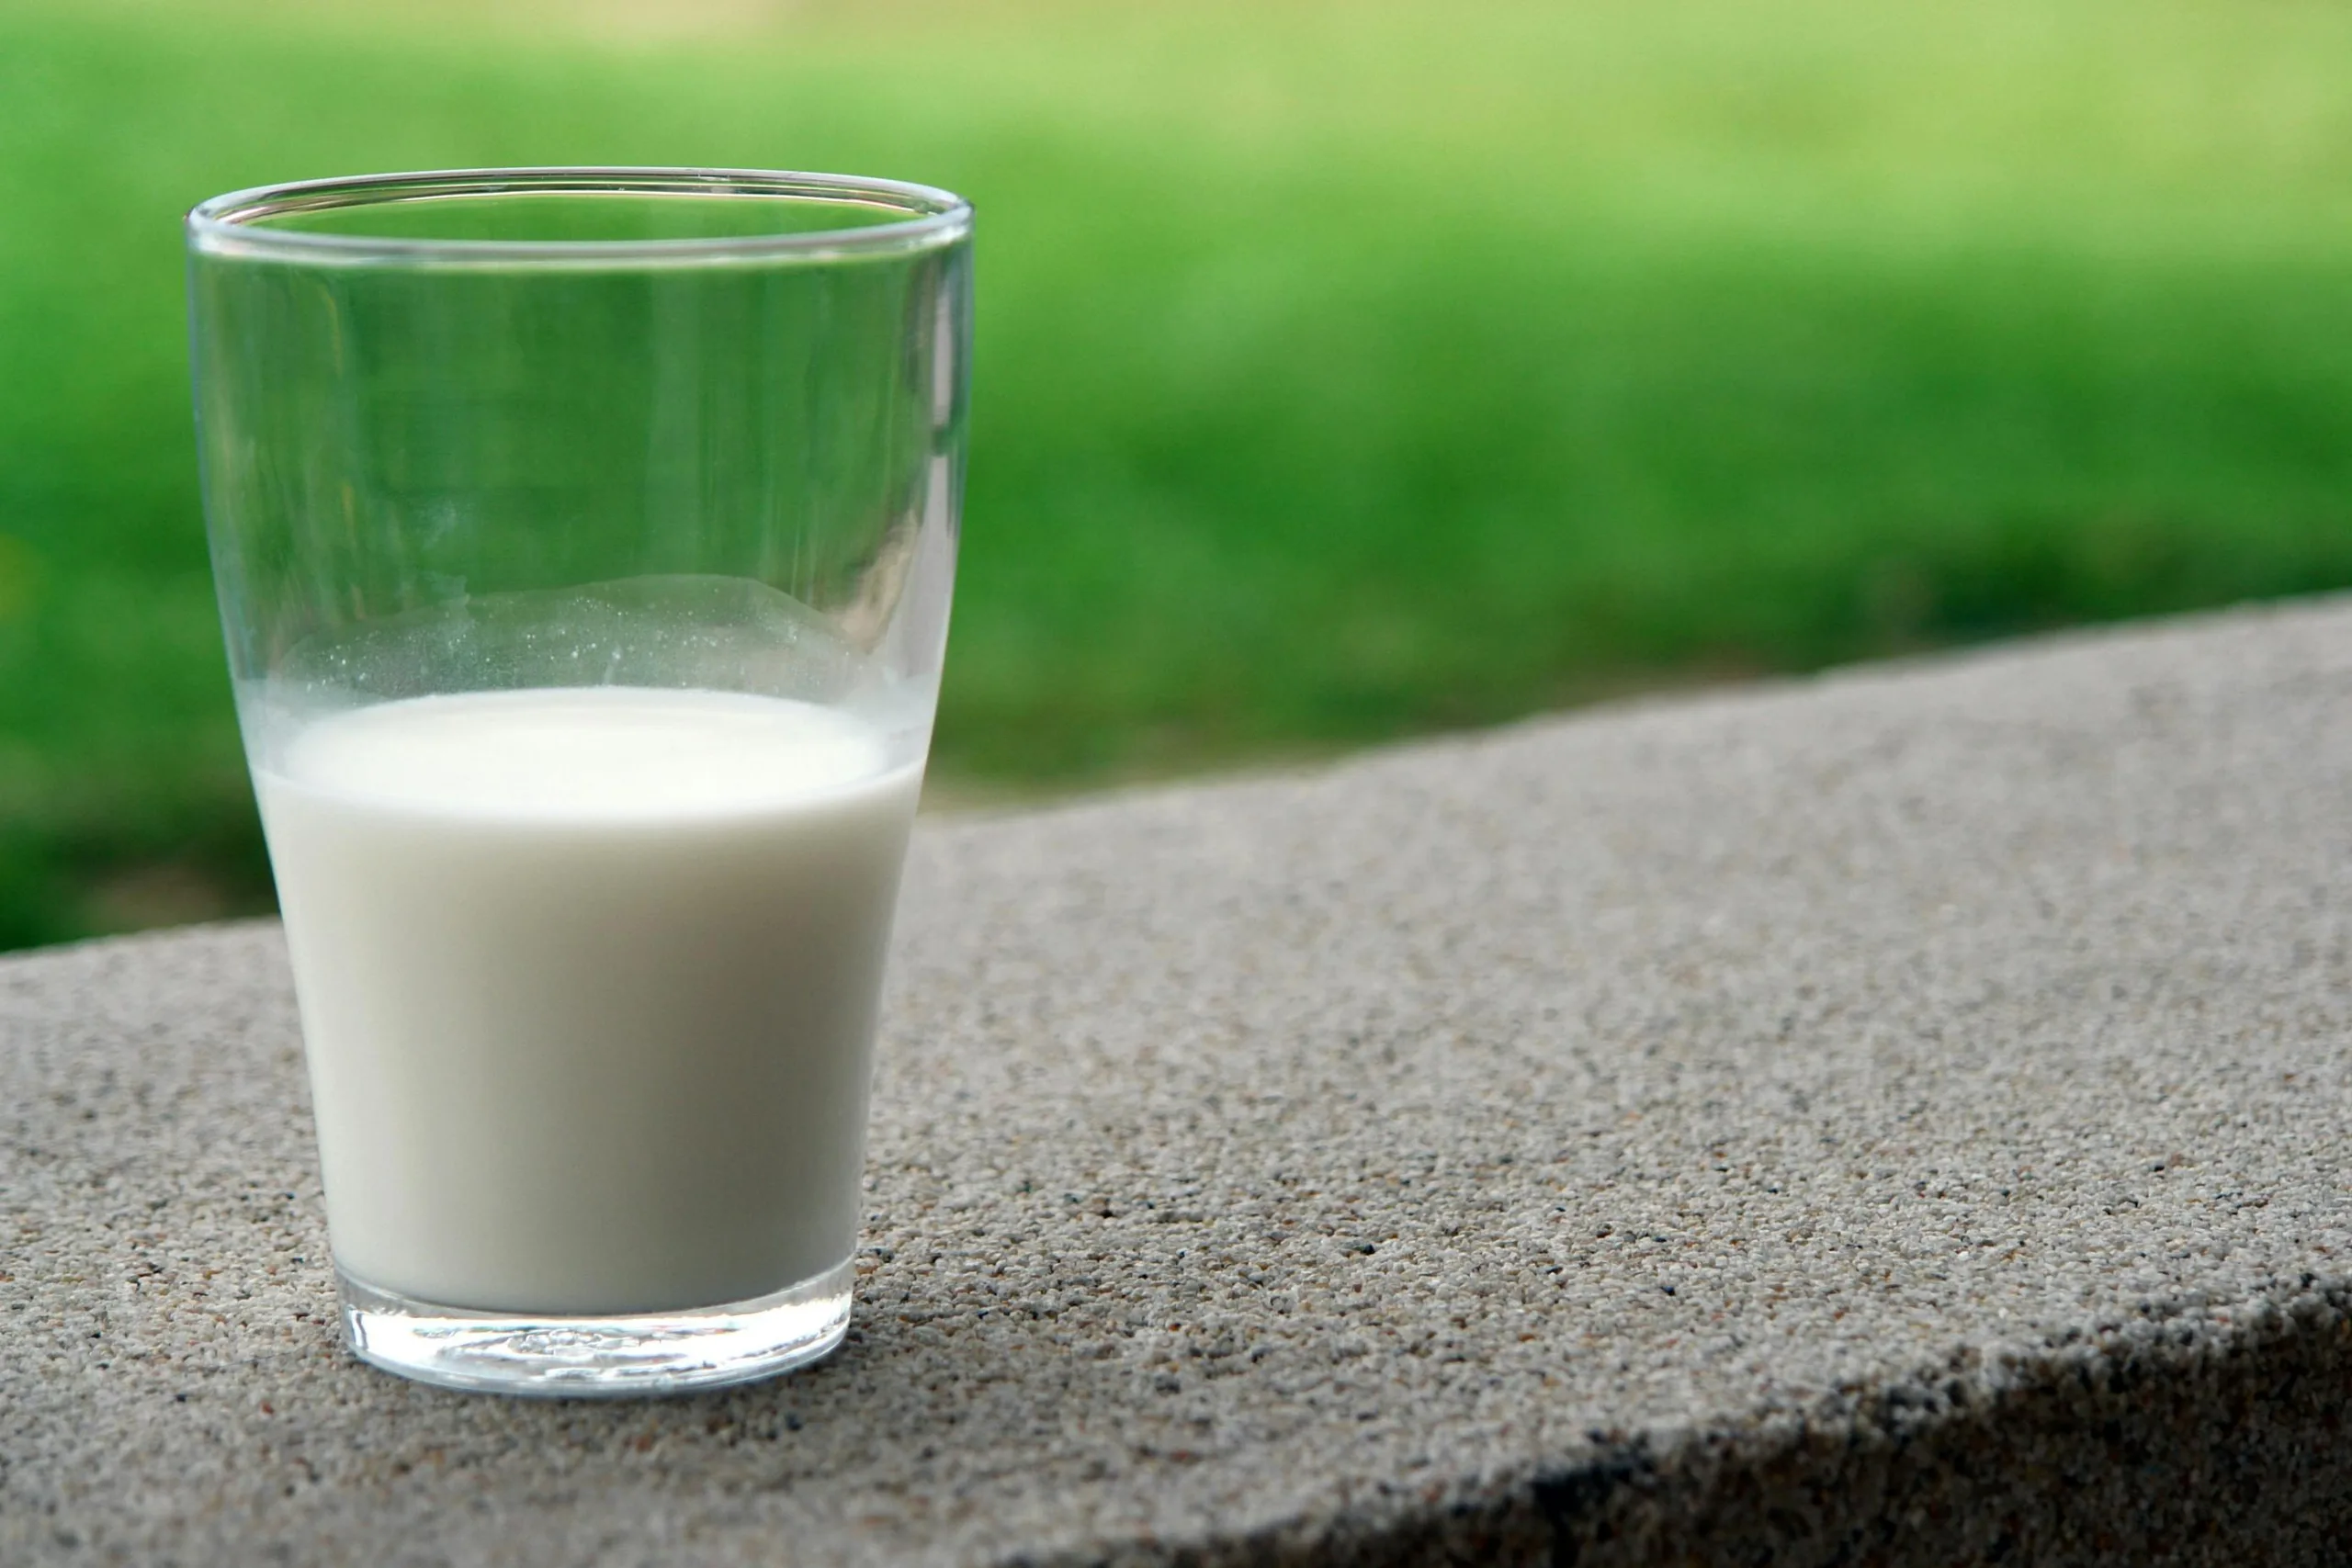 Milk containing casein in a glass on a pavement with green grass in the background.